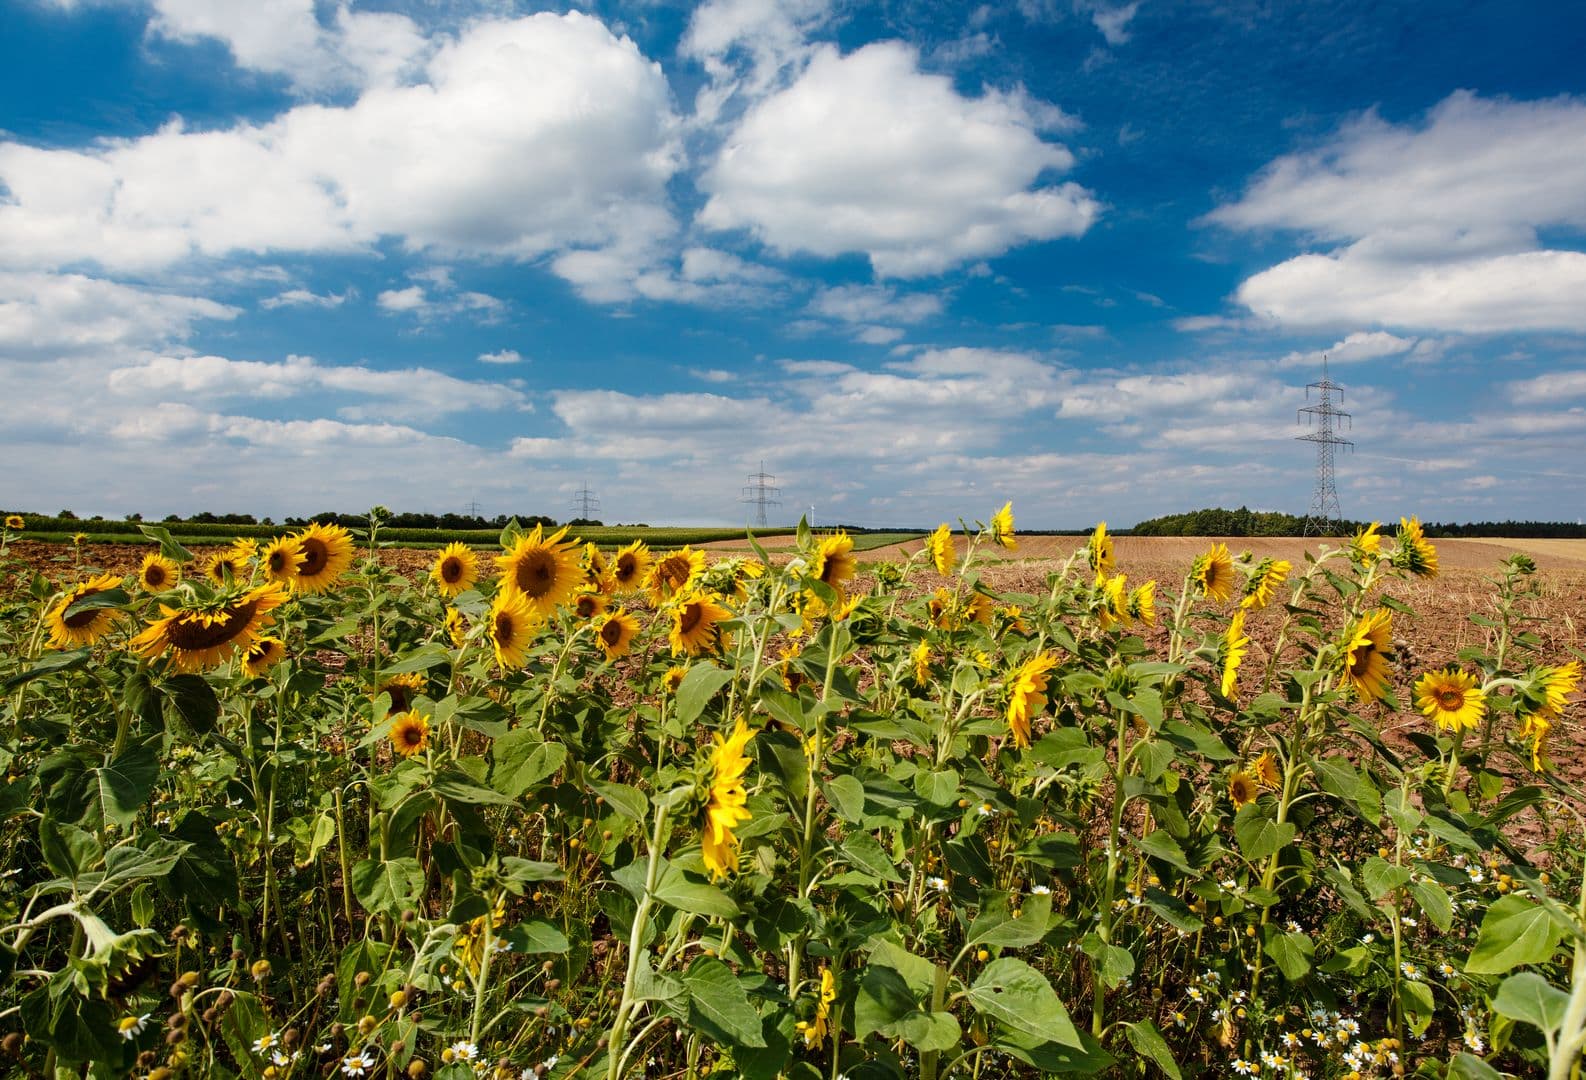 Landscape of Franken, Bavaria, with sunflowers and pylons